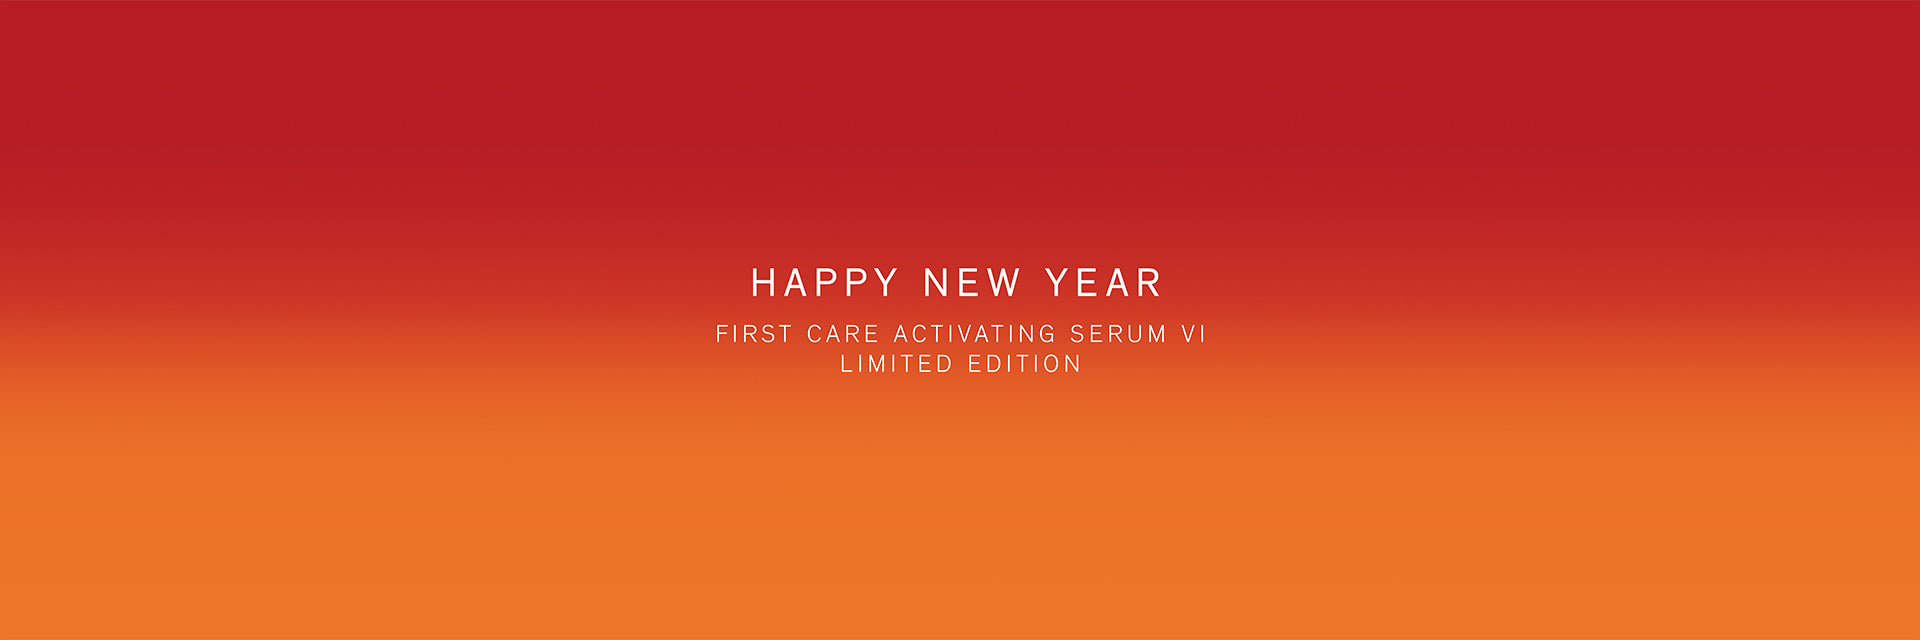 HAPPY NEW YEAR / FIRST CARE ACTIVATING SERUM VI LIMITED EDITION